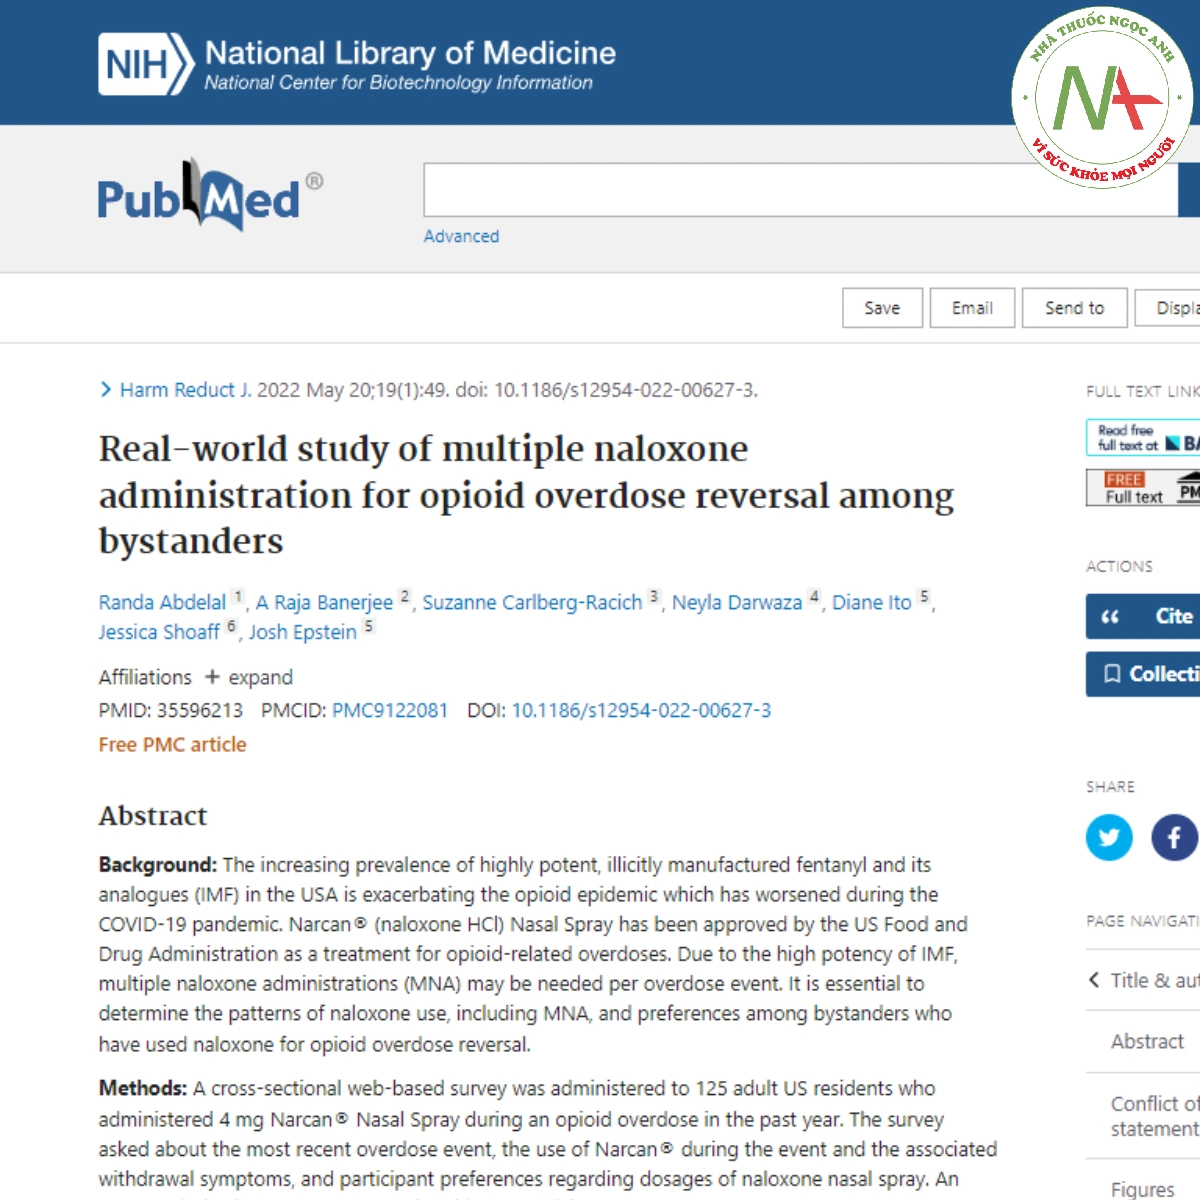 Real-world study of multiple naloxone administration for opioid overdose reversal among bystanders